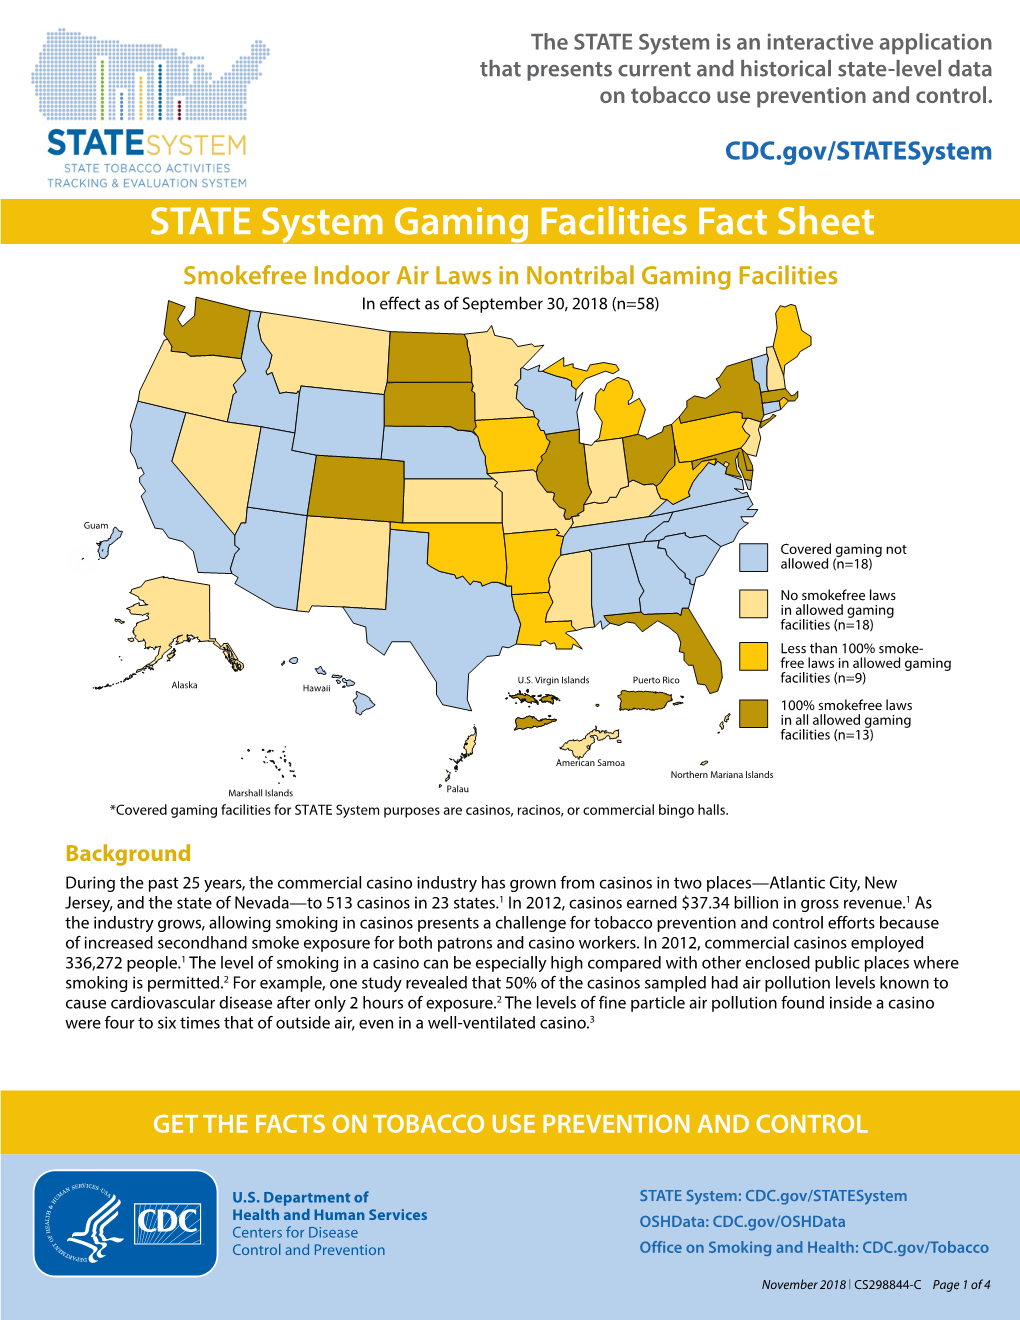 STATE System Gaming Facilities Fact Sheet Smokefree Indoor Air Laws in Nontribal Gaming Facilities in Effect As of September 30, 2018 (N=58)